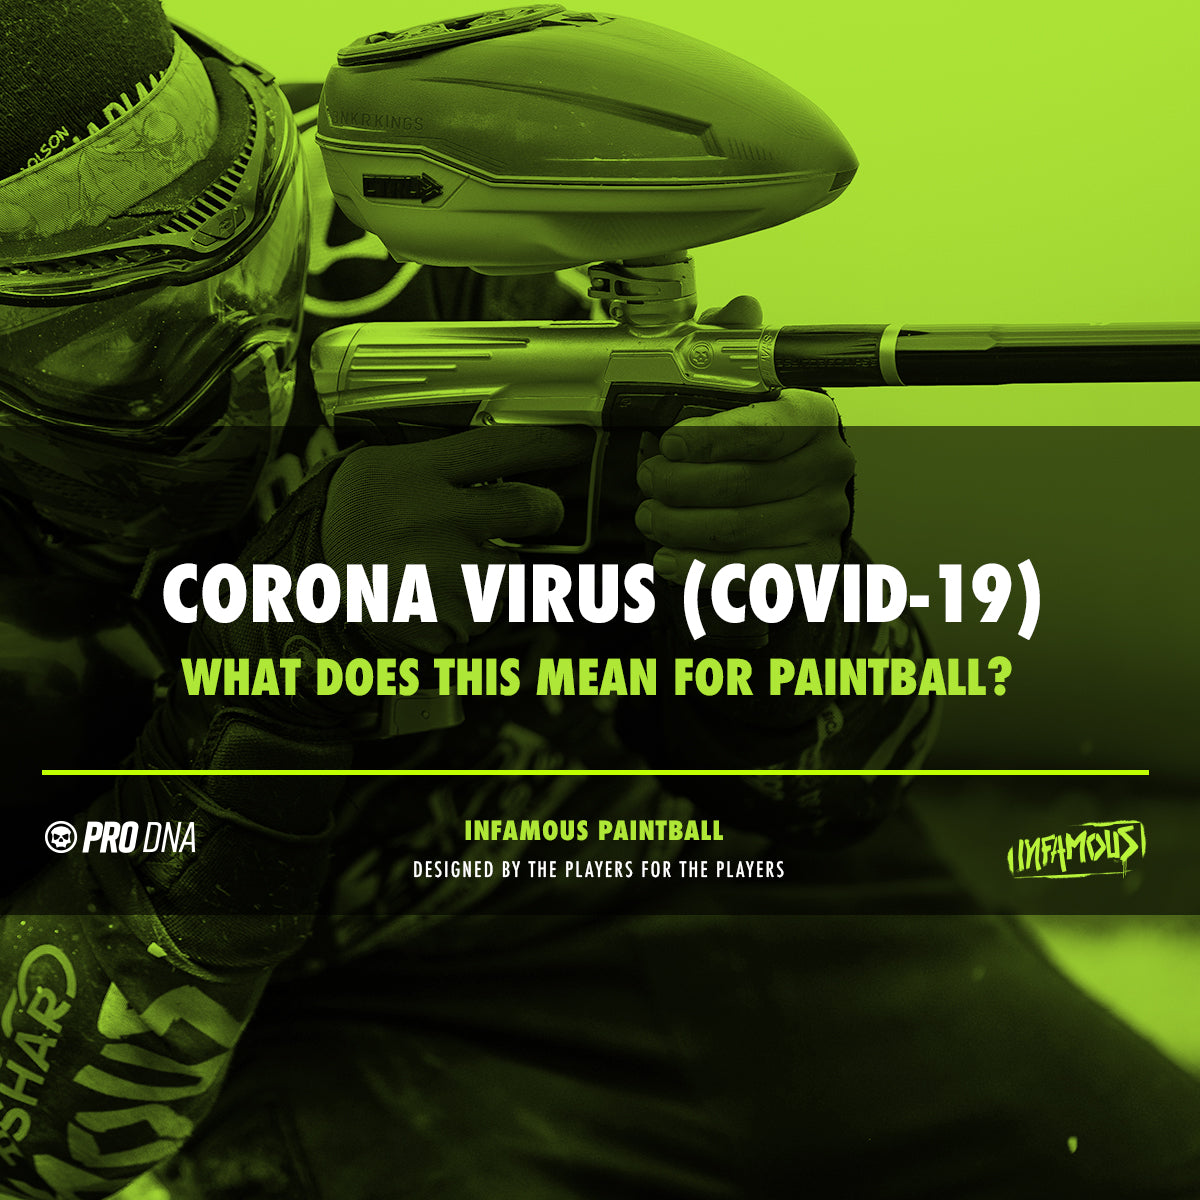 Corona Virus (COVID-19) - What does this mean for Paintball?